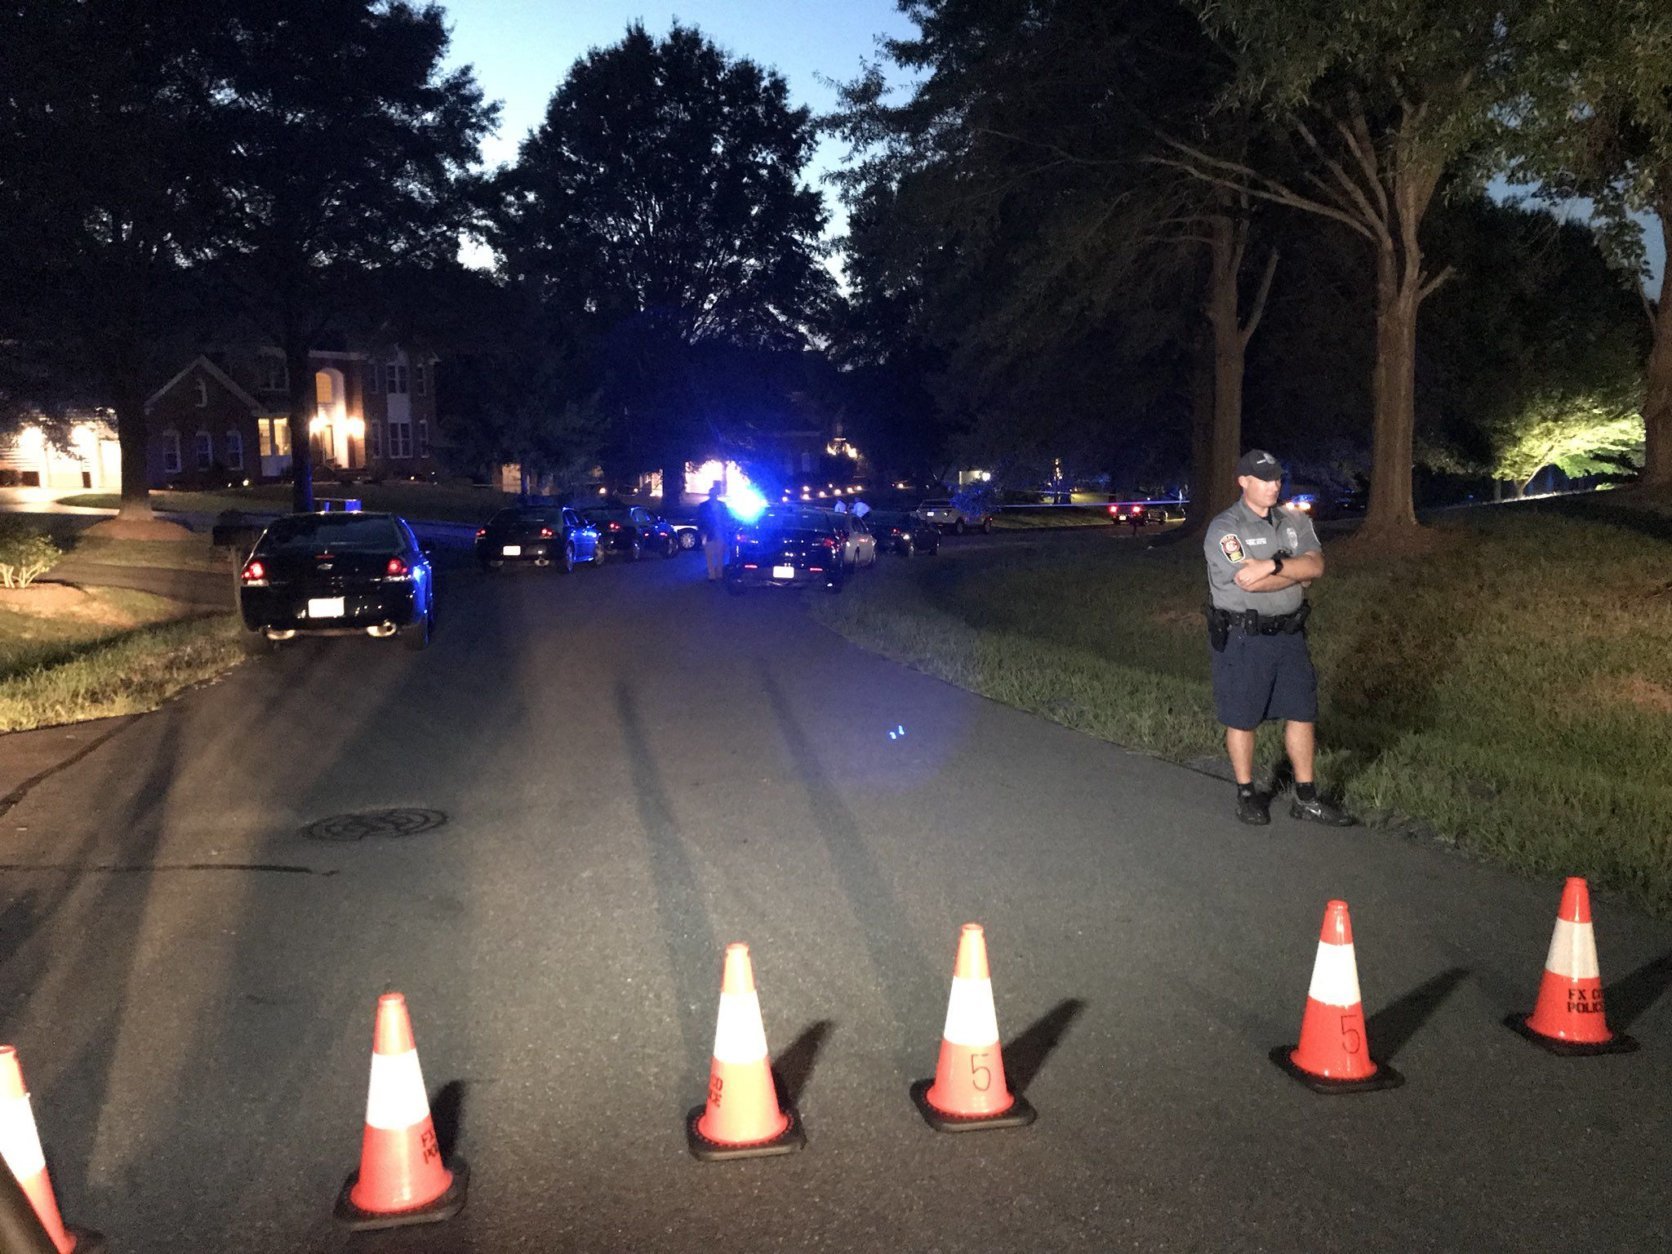 Three people were found dead in a Fairfax County home, police said Wednesday night. (WTOP/Michelle Basch)